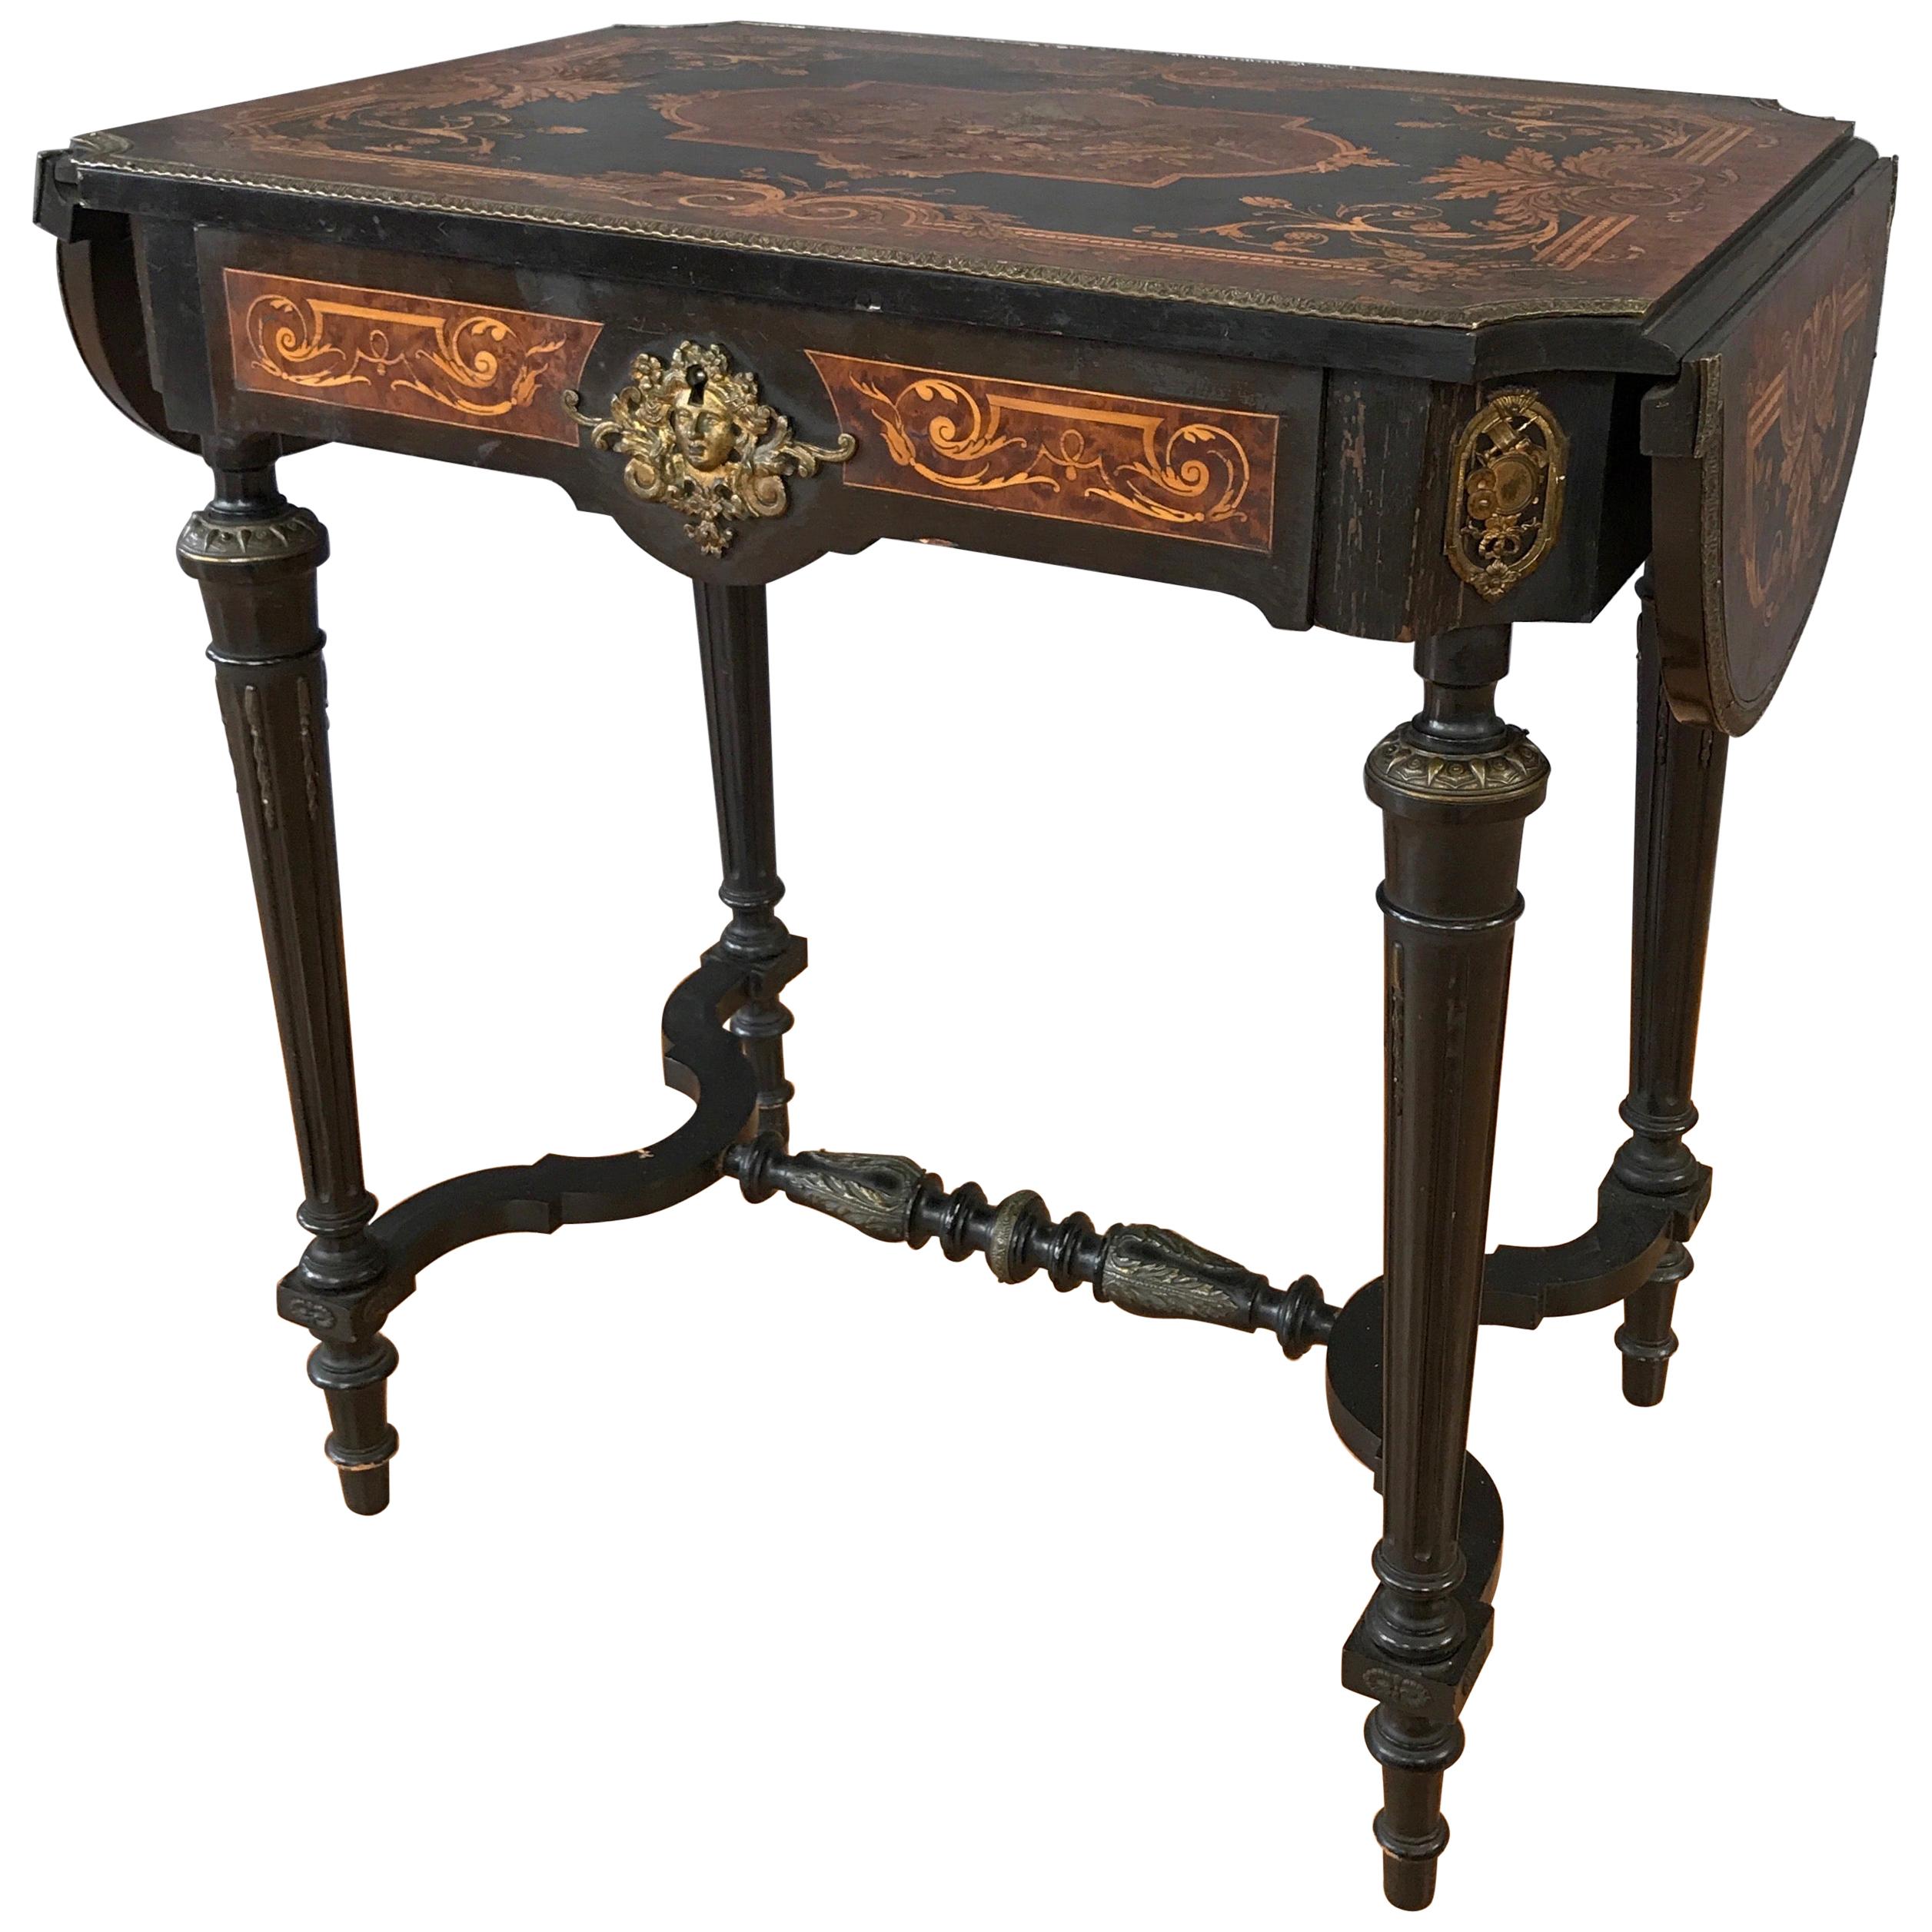 Napoleon III French Marquetry Drop-Leaf Salon or Writing Table with Drawer, 1860